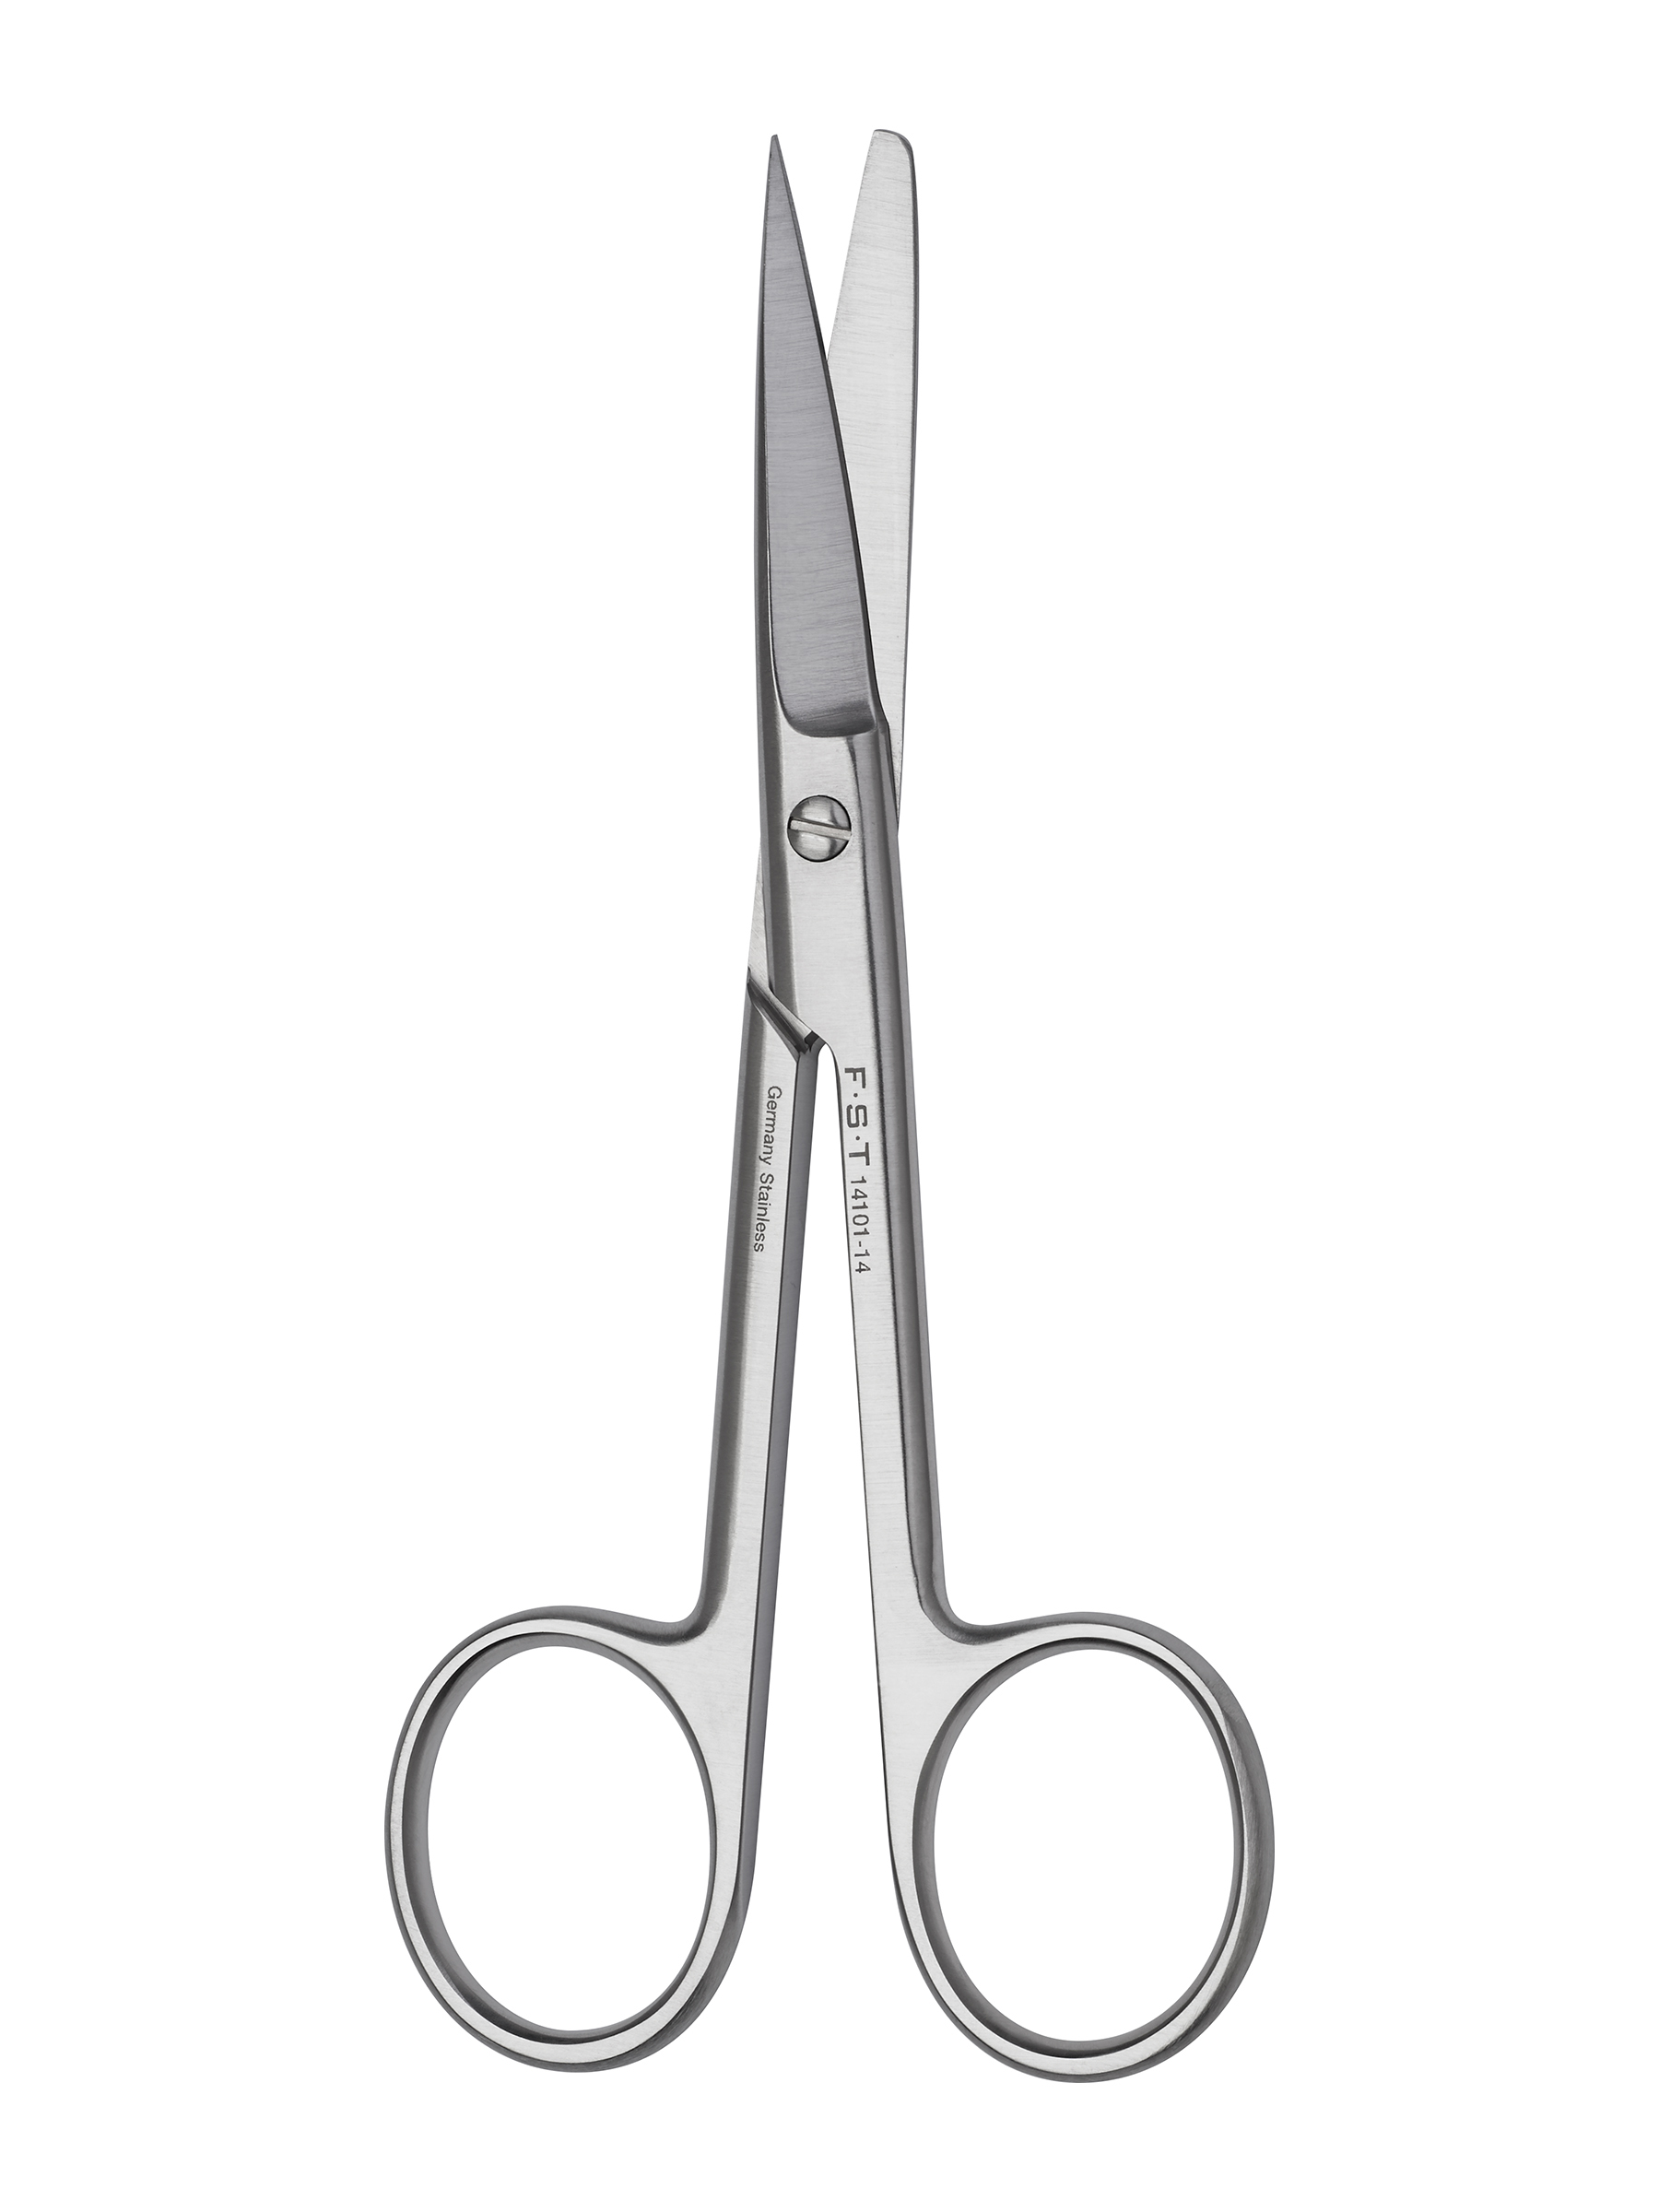 Surgical Scissors - Large Loops